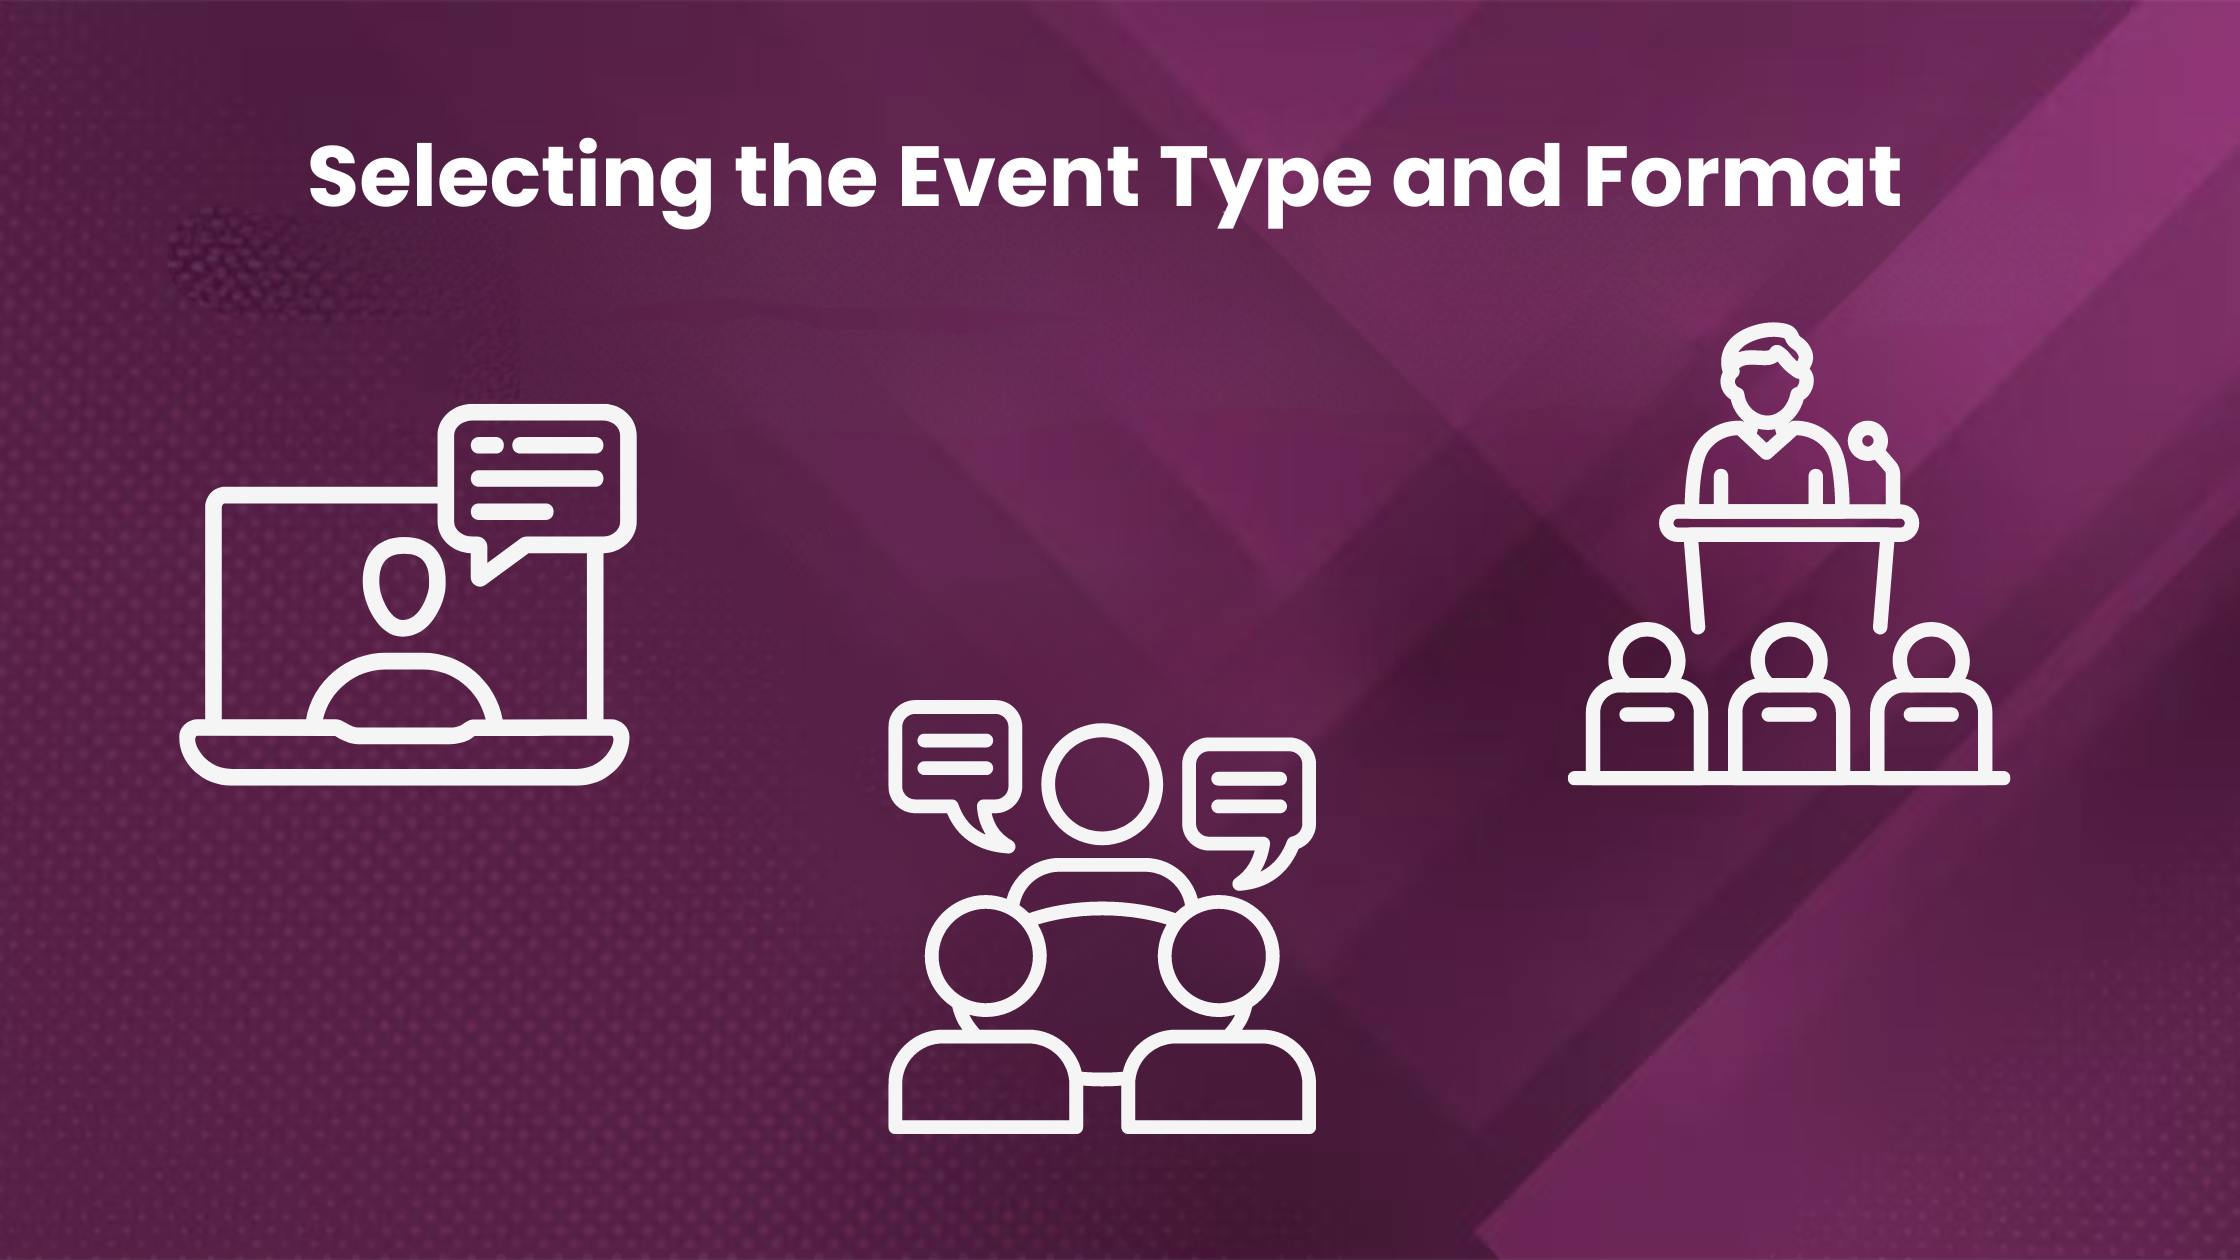 Selecting the event type and format